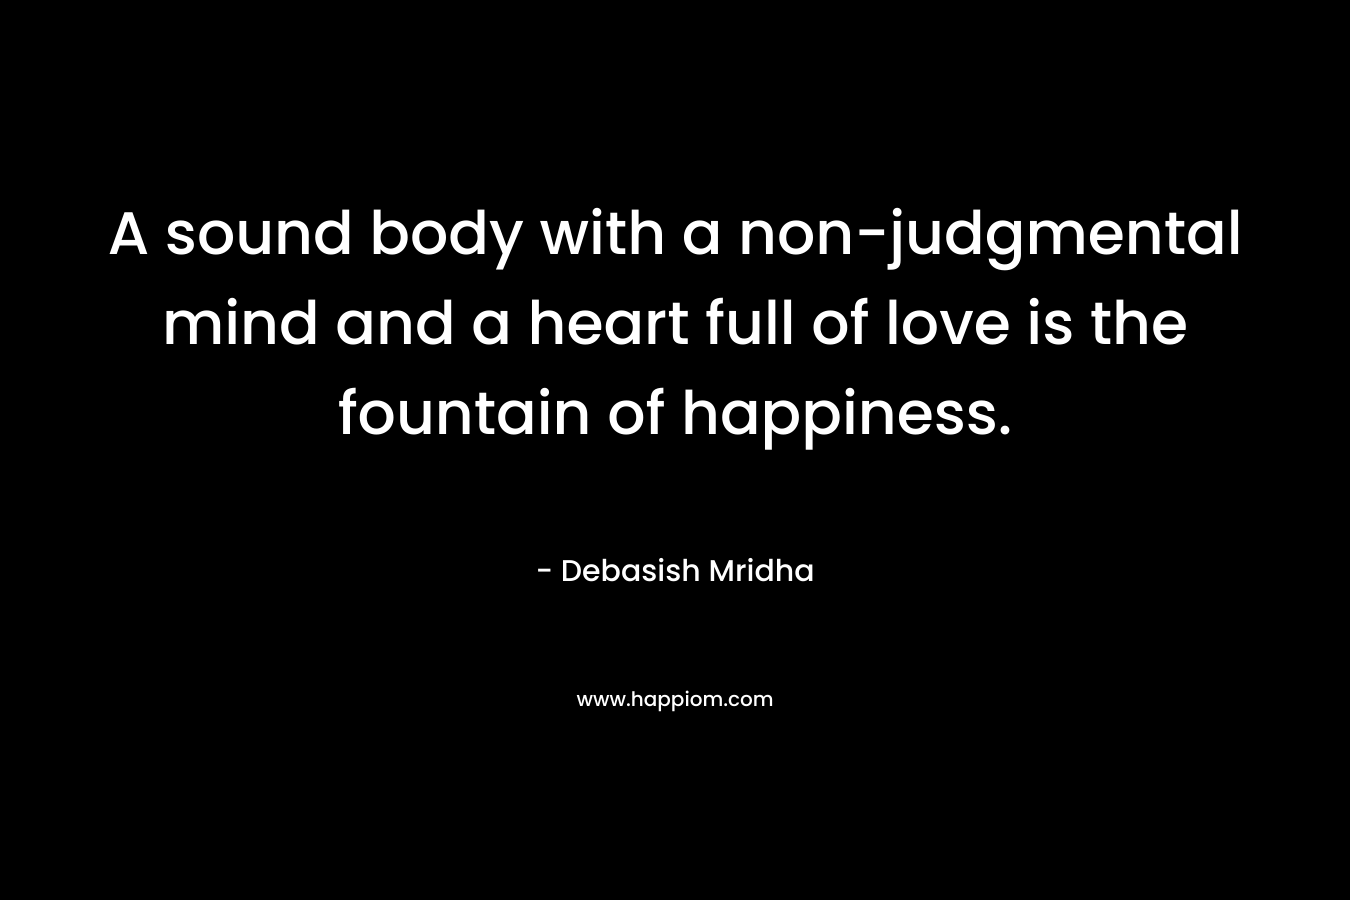 A sound body with a non-judgmental mind and a heart full of love is the fountain of happiness.